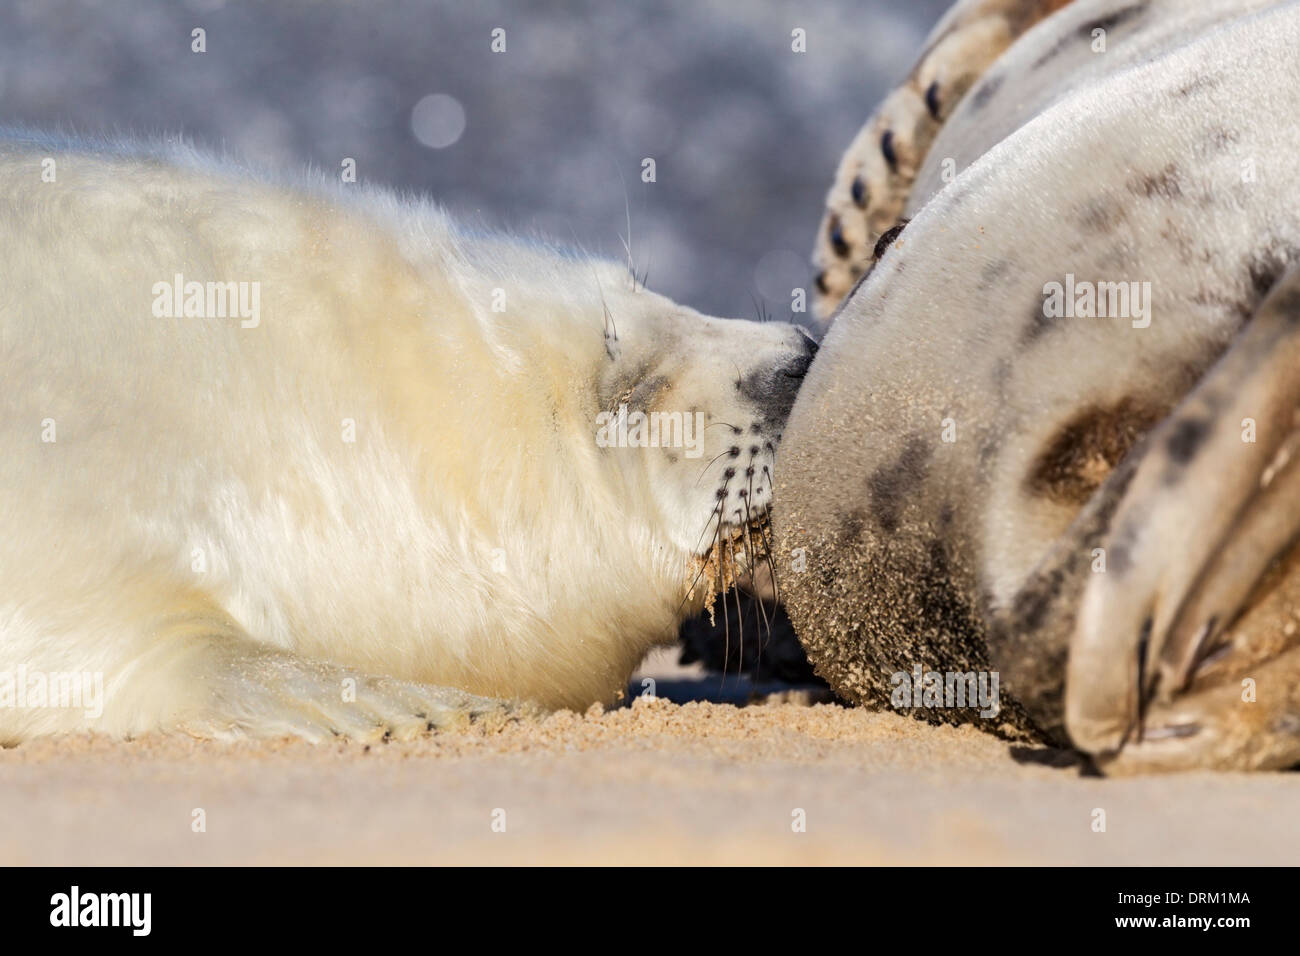 A Grey seal pup in white natal fur is suckled by its mother on the beach, North Sea coast, Norfolk, England Stock Photo